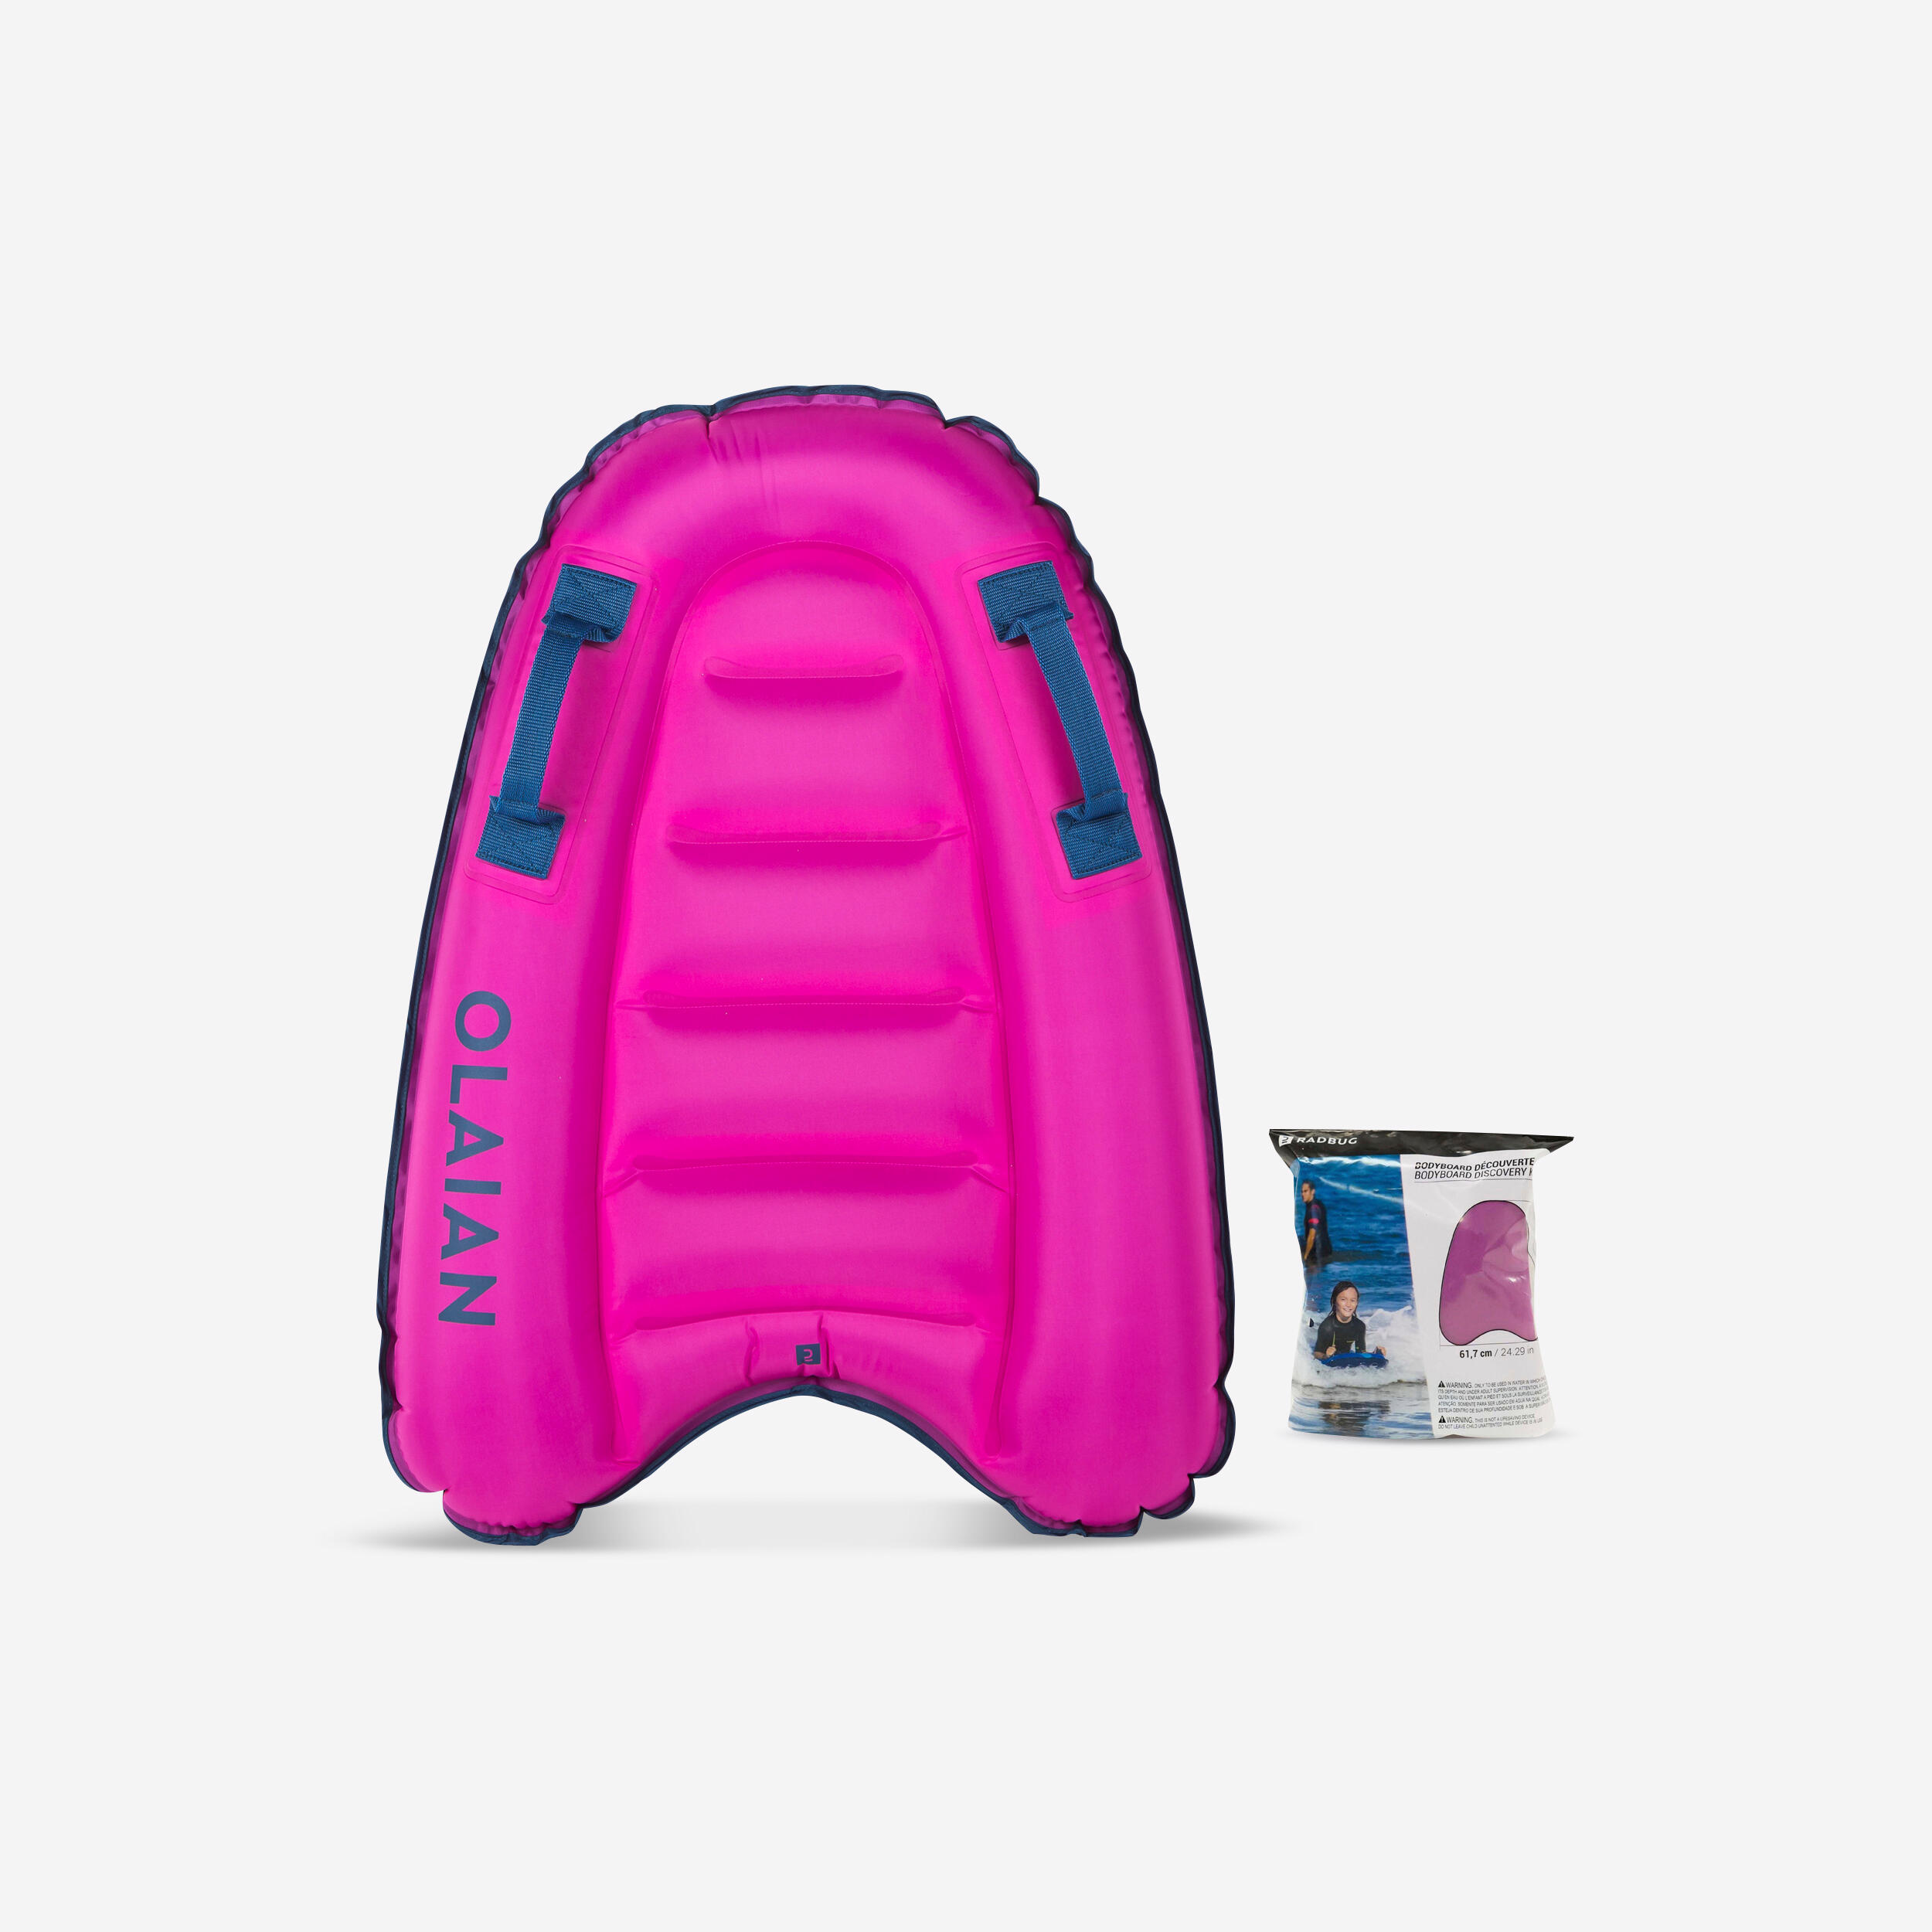 Kid's inflatable bodyboard for 4-8 year-olds (15-25 kg) - pink 1/12